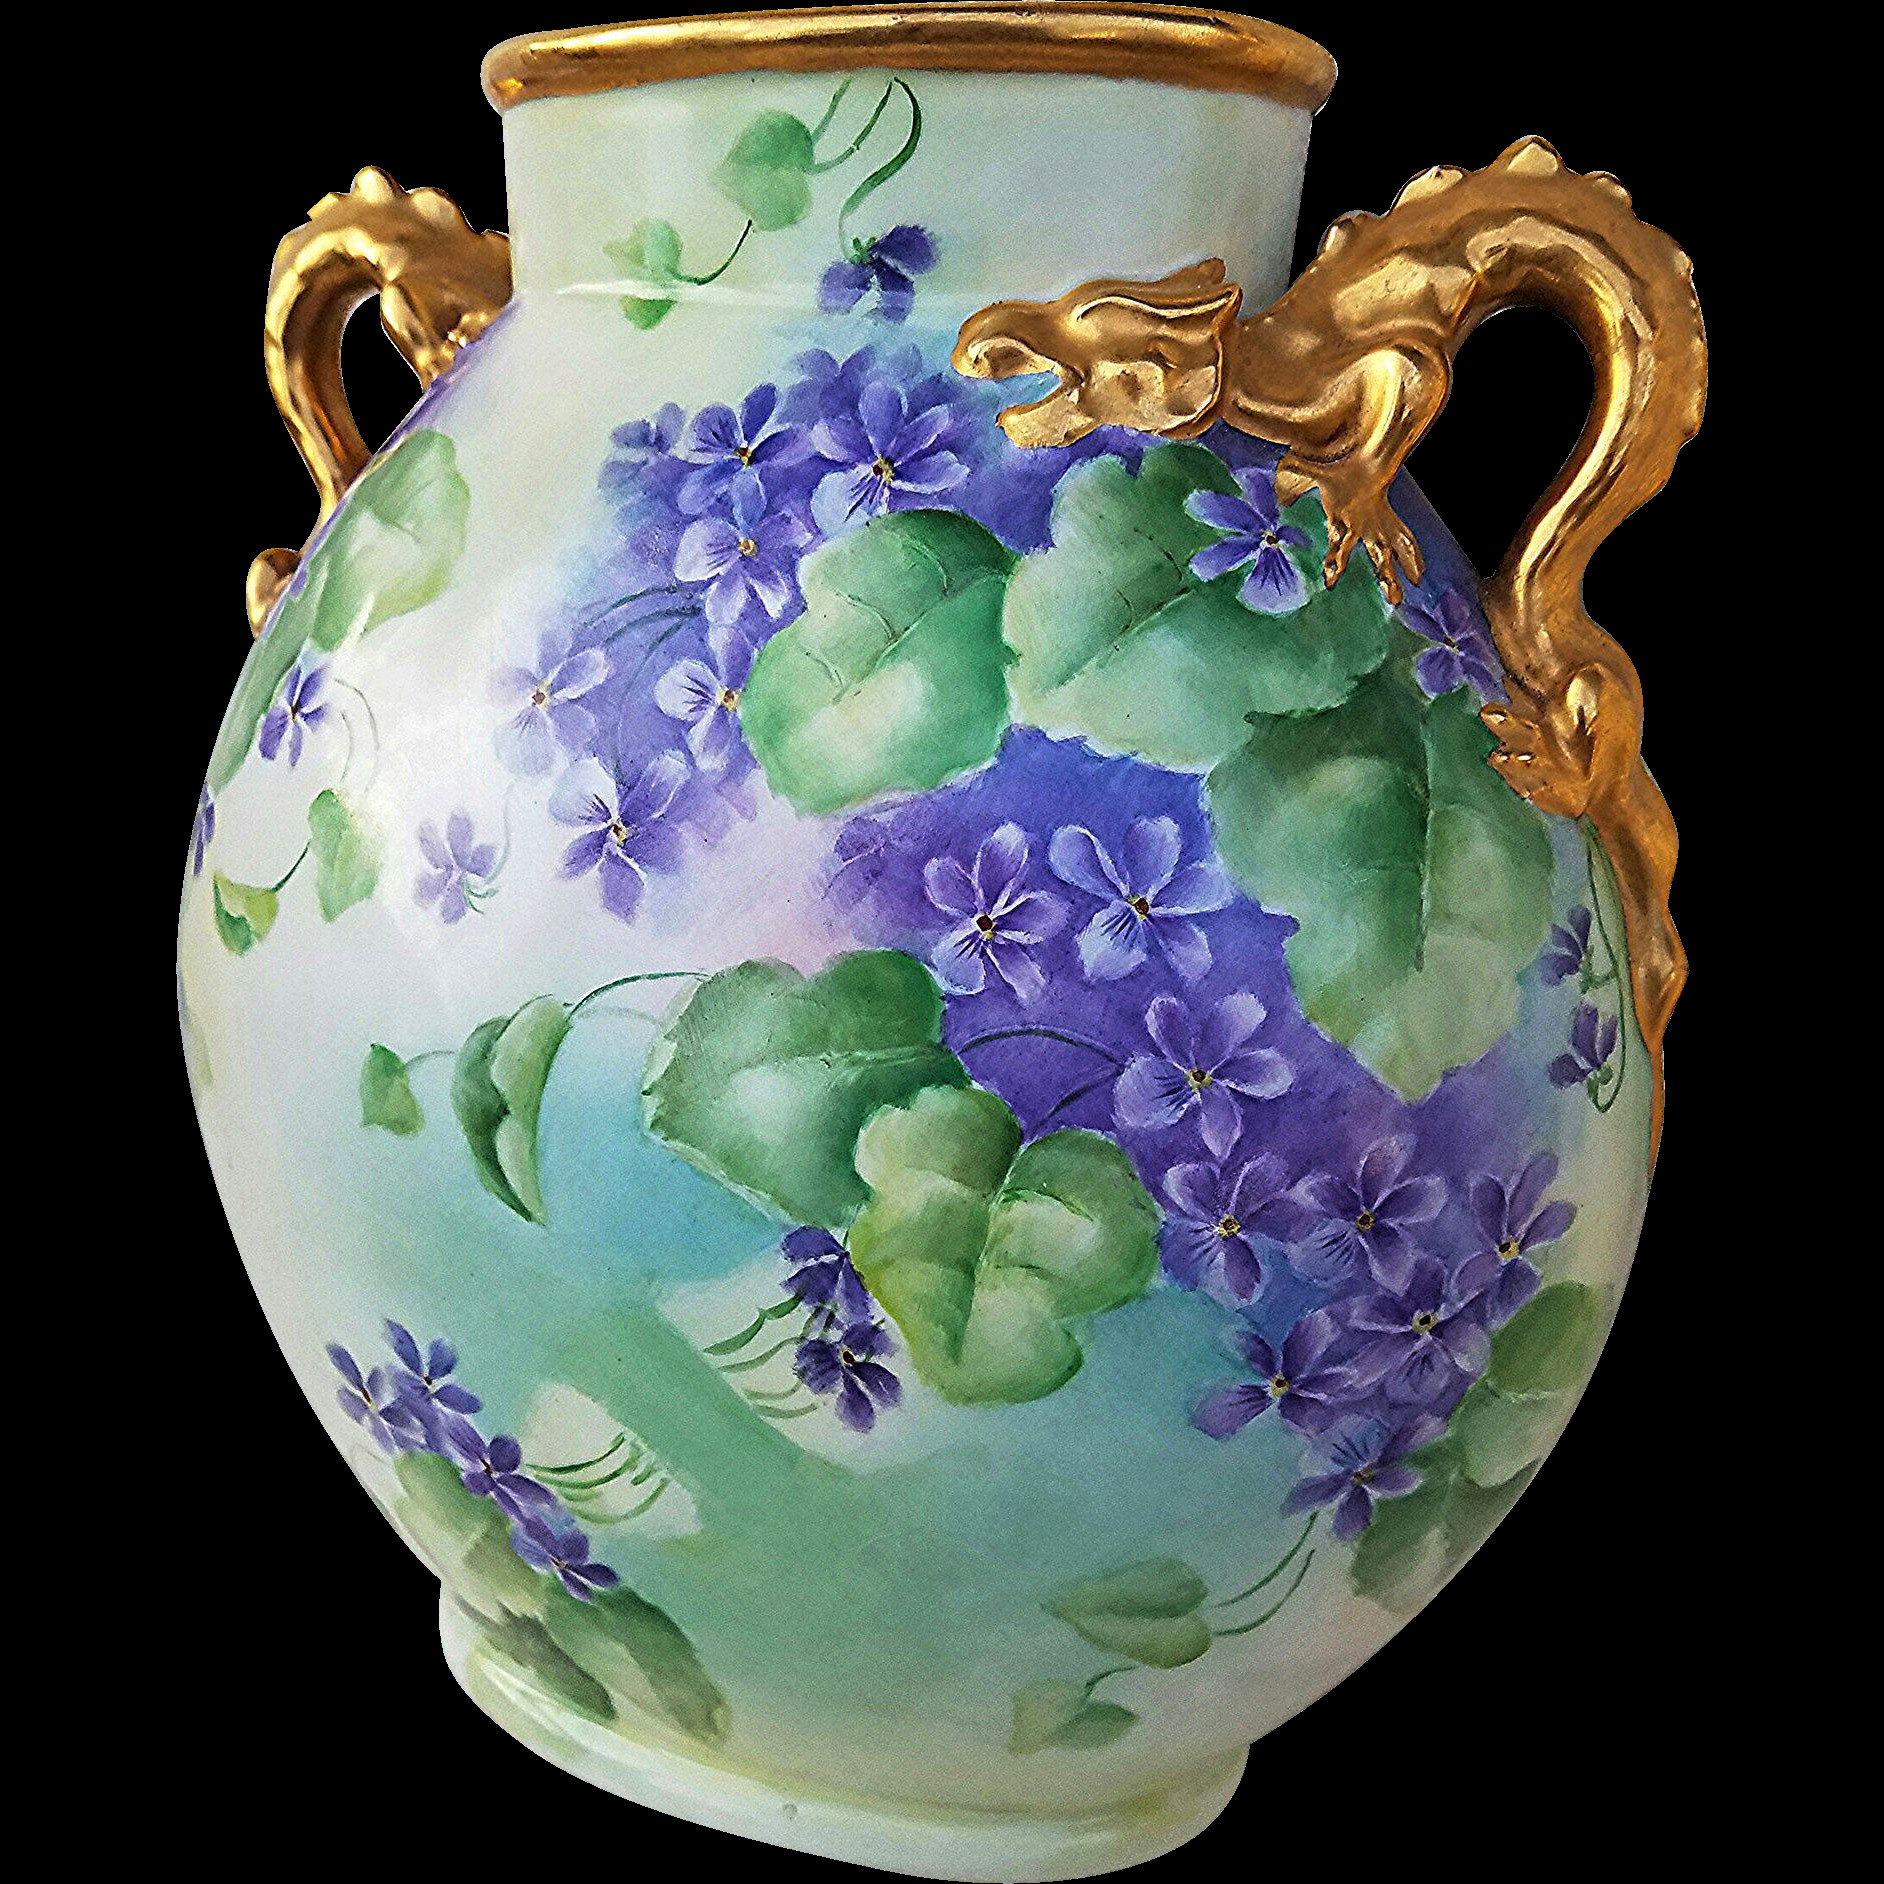 27 Awesome Limoges Vase Prices 2024 free download limoges vase prices of gorgeous jean pouyat limoges france 1900s hand painted violets intended for gorgeous jean pouyat limoges france 1900s hand painted violets la bazaar ruby lane